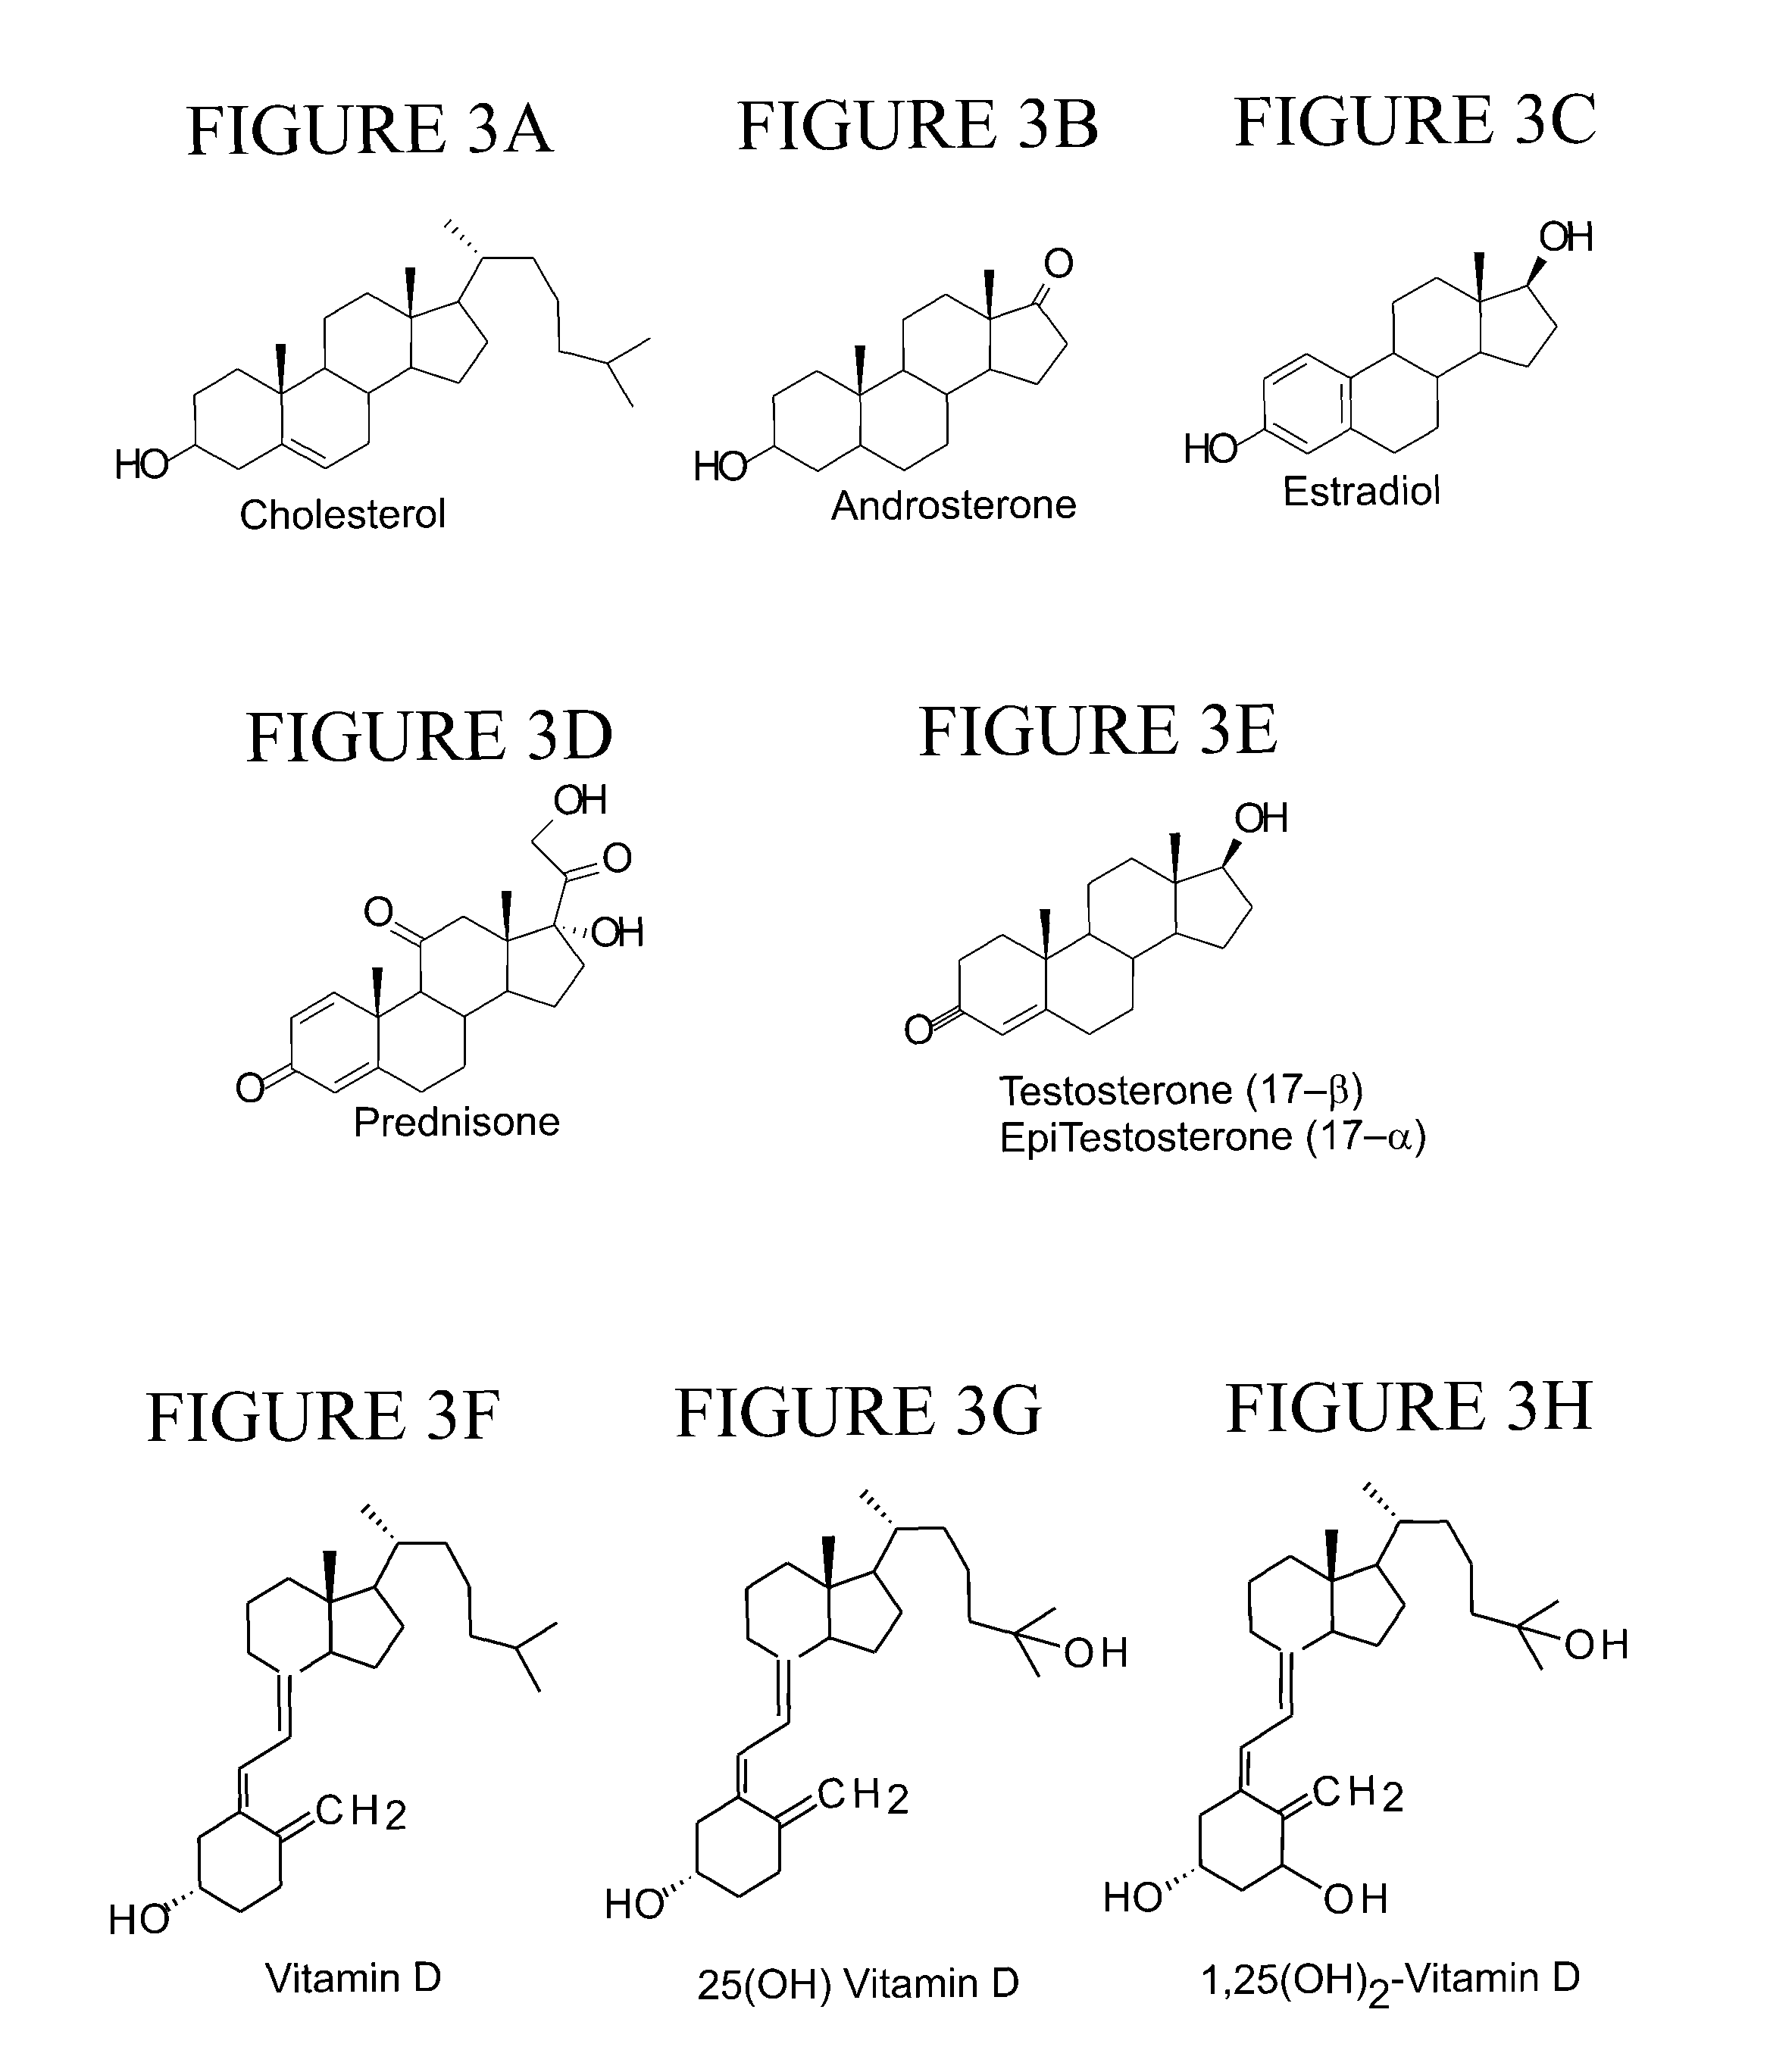 Tagging reagents and methods for hydroxylated compounds